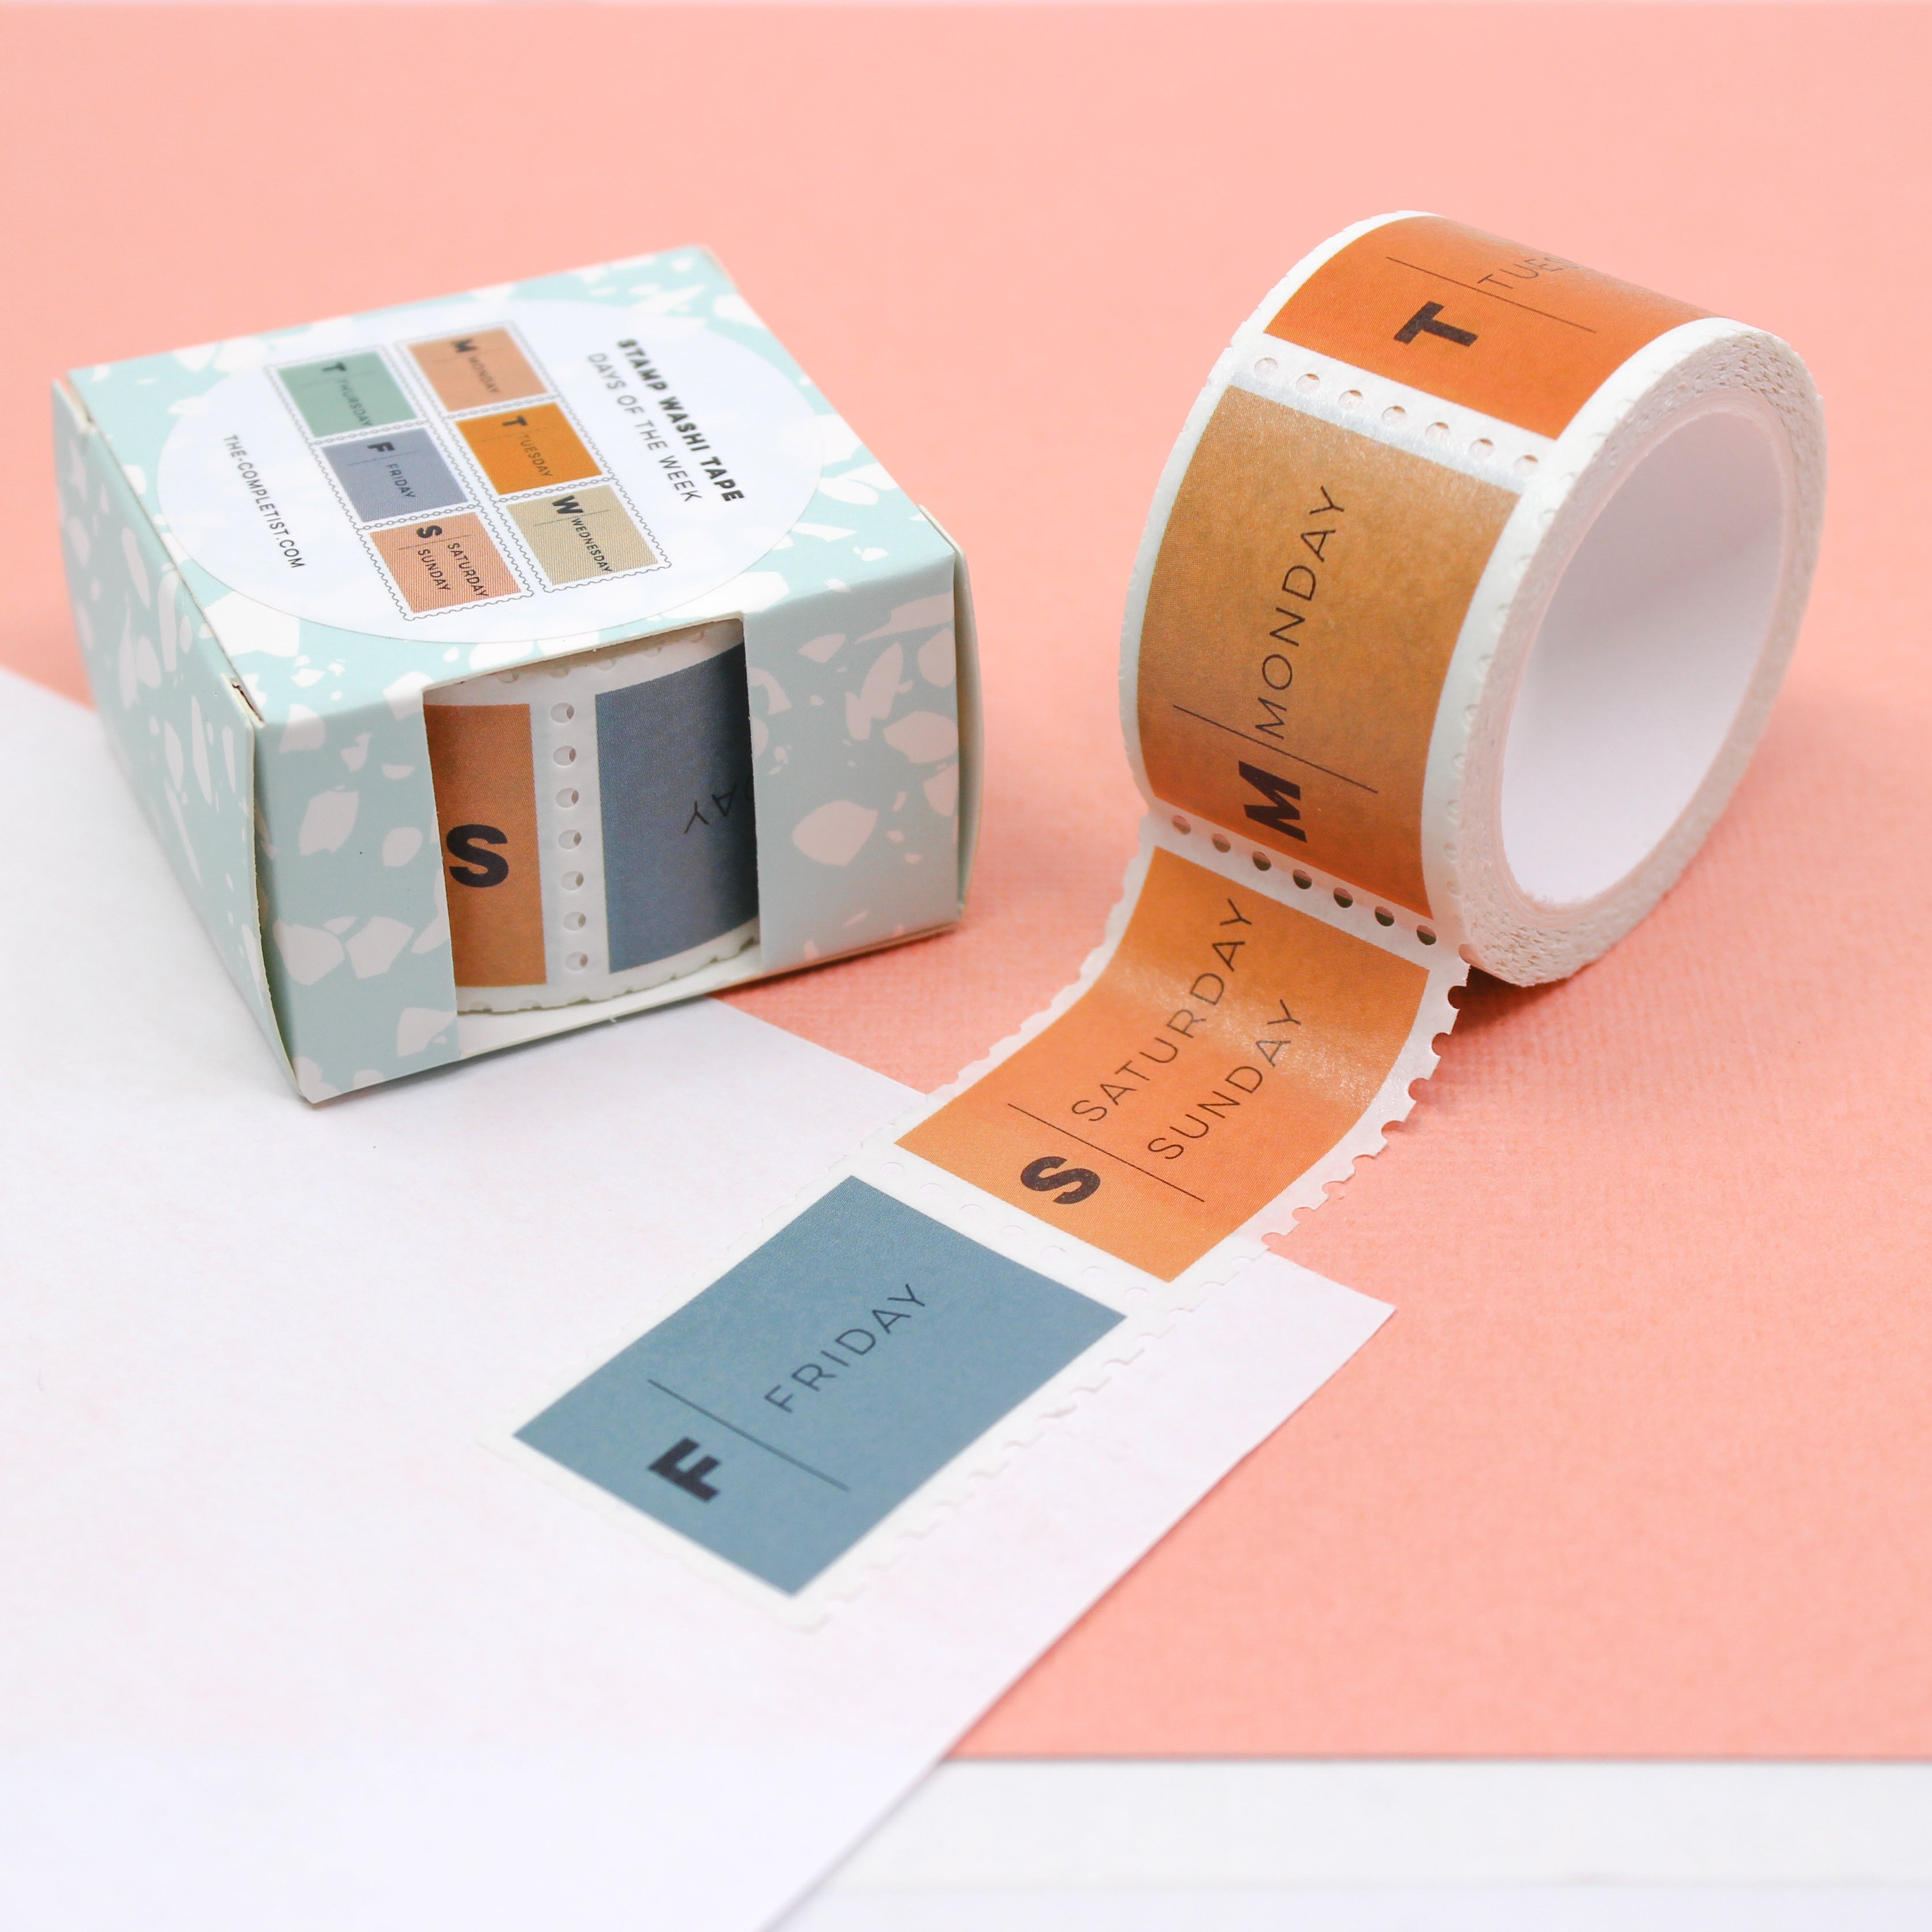 This is a pastel color days of the week stamps pattern washi tape from BBB Supplies Craft Shop